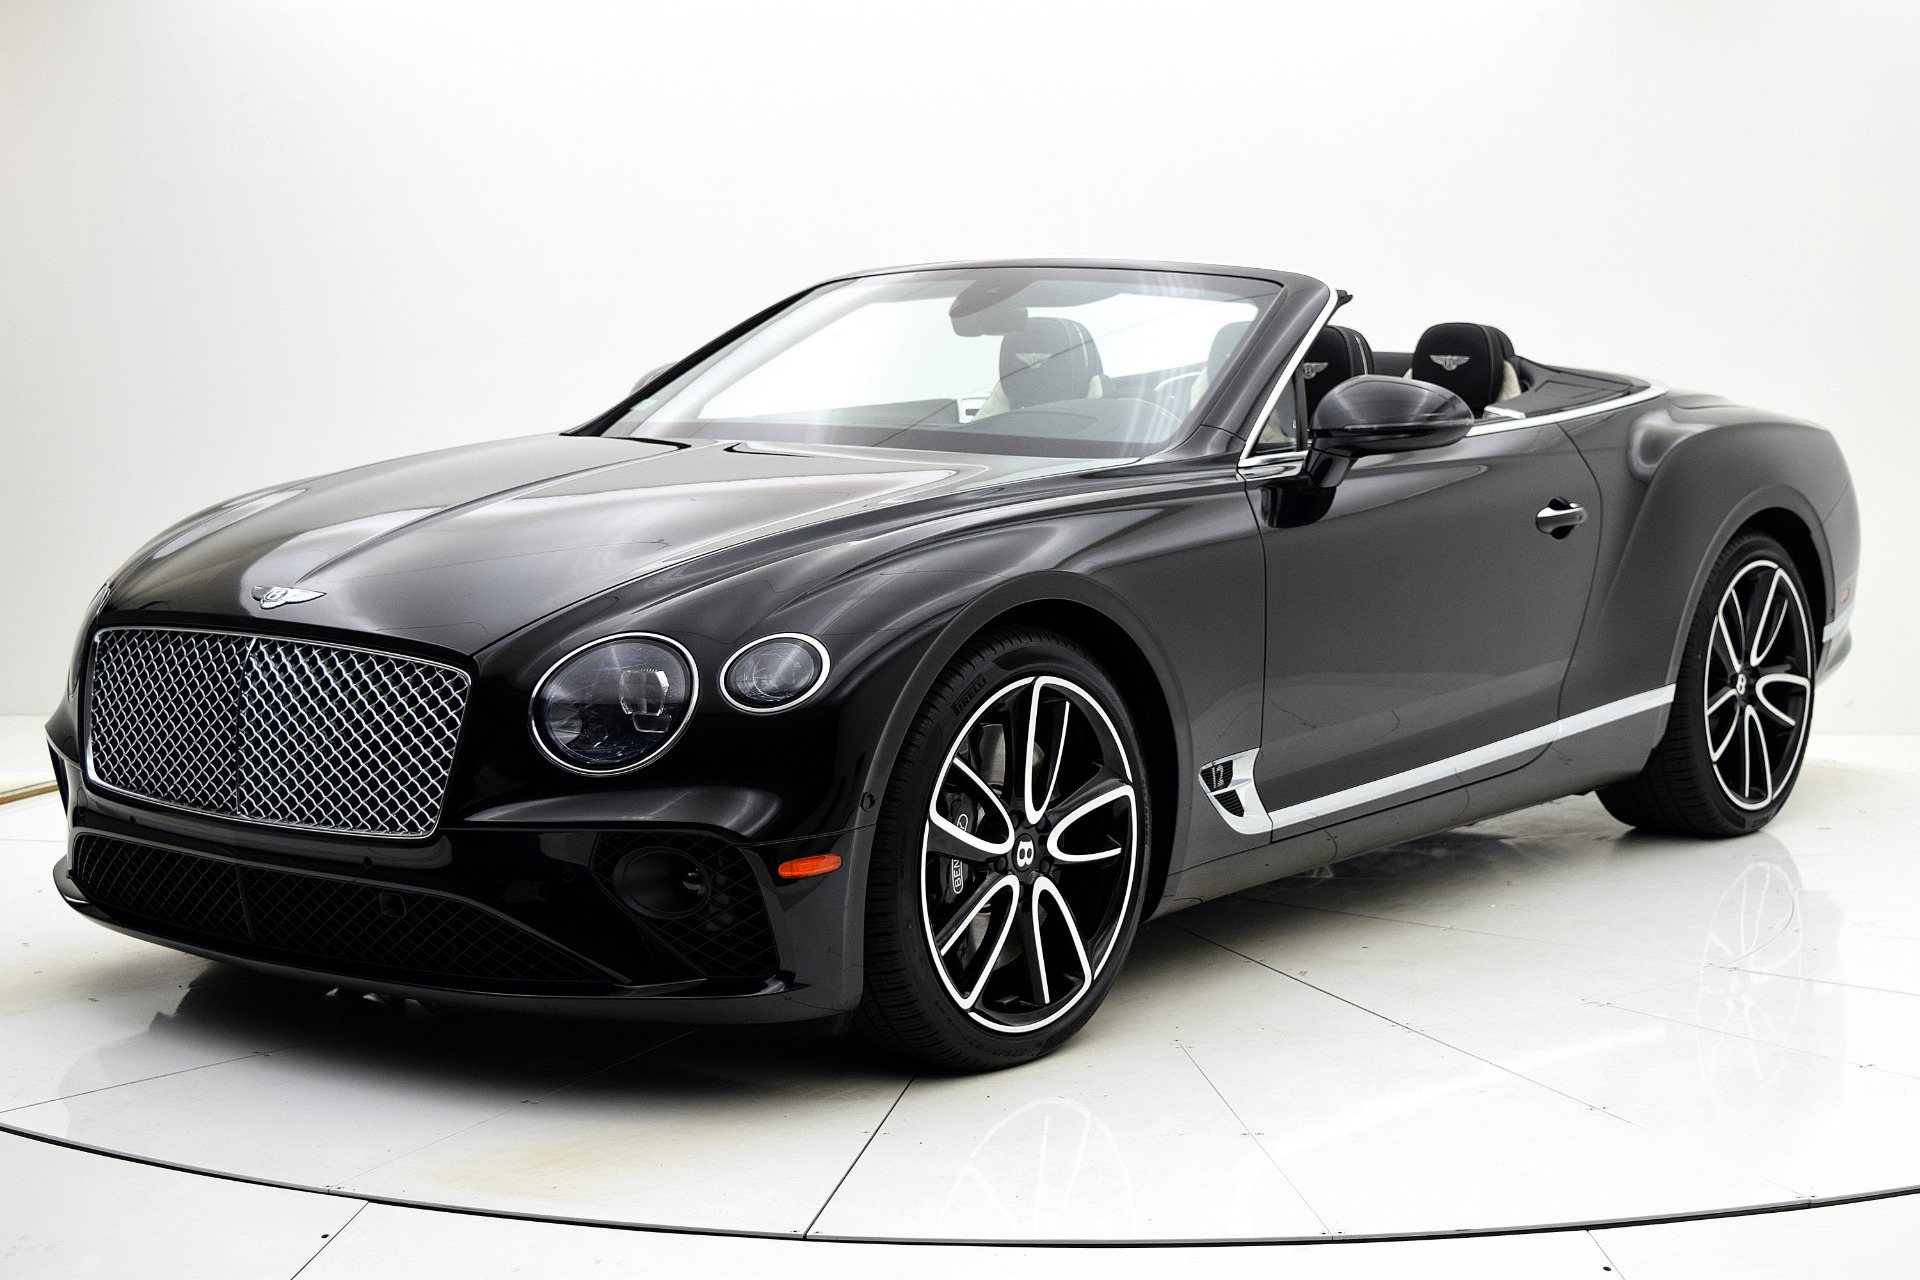 New 2020 Bentley Continental GT W12 Convertible for sale Sold at Bentley Palmyra N.J. in Palmyra NJ 08065 2